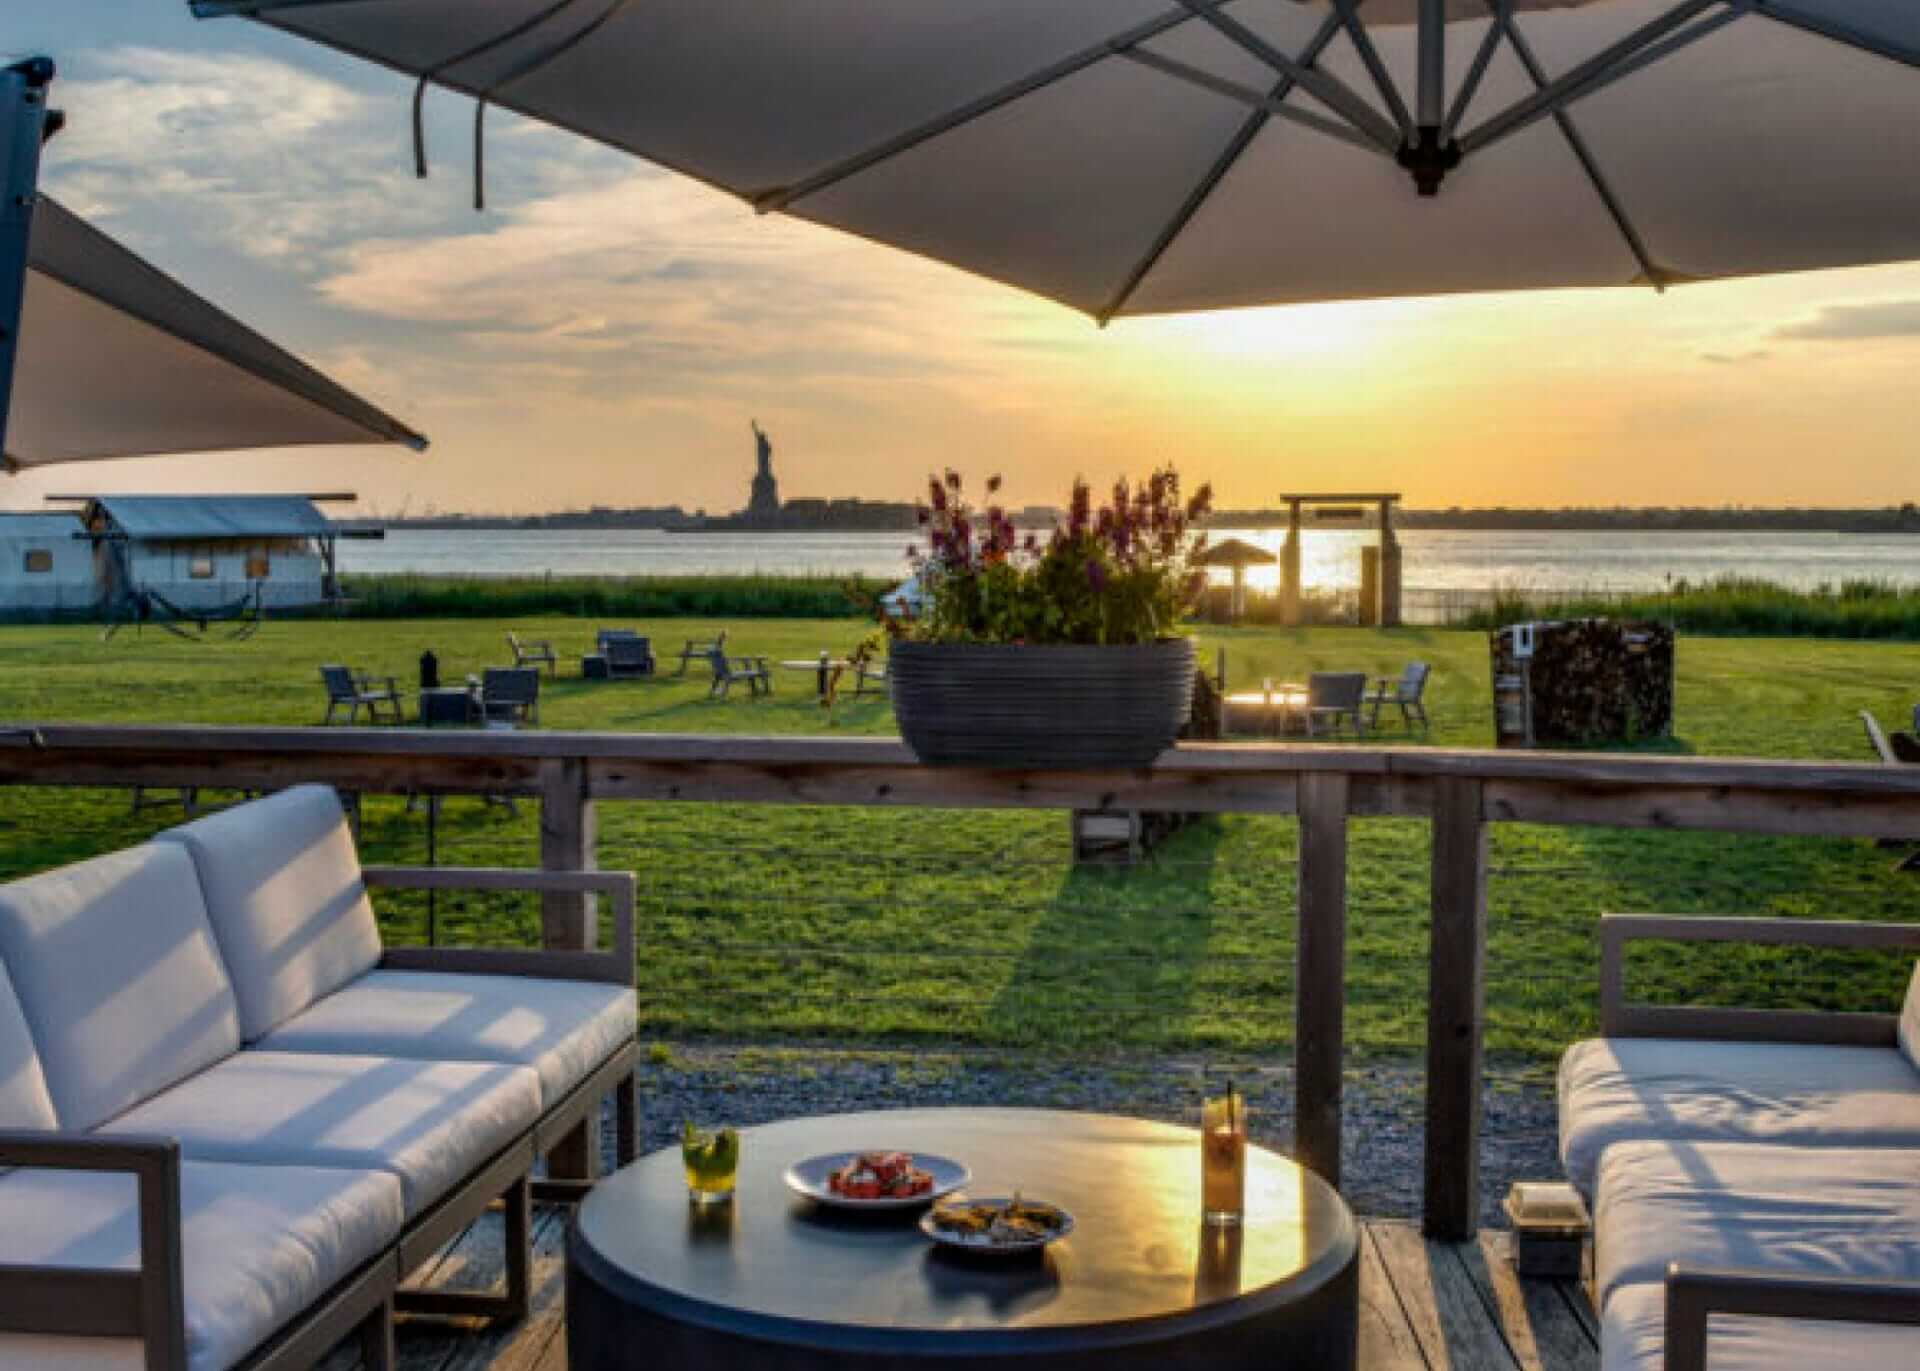 Glamping and relaxing on Governor's Island